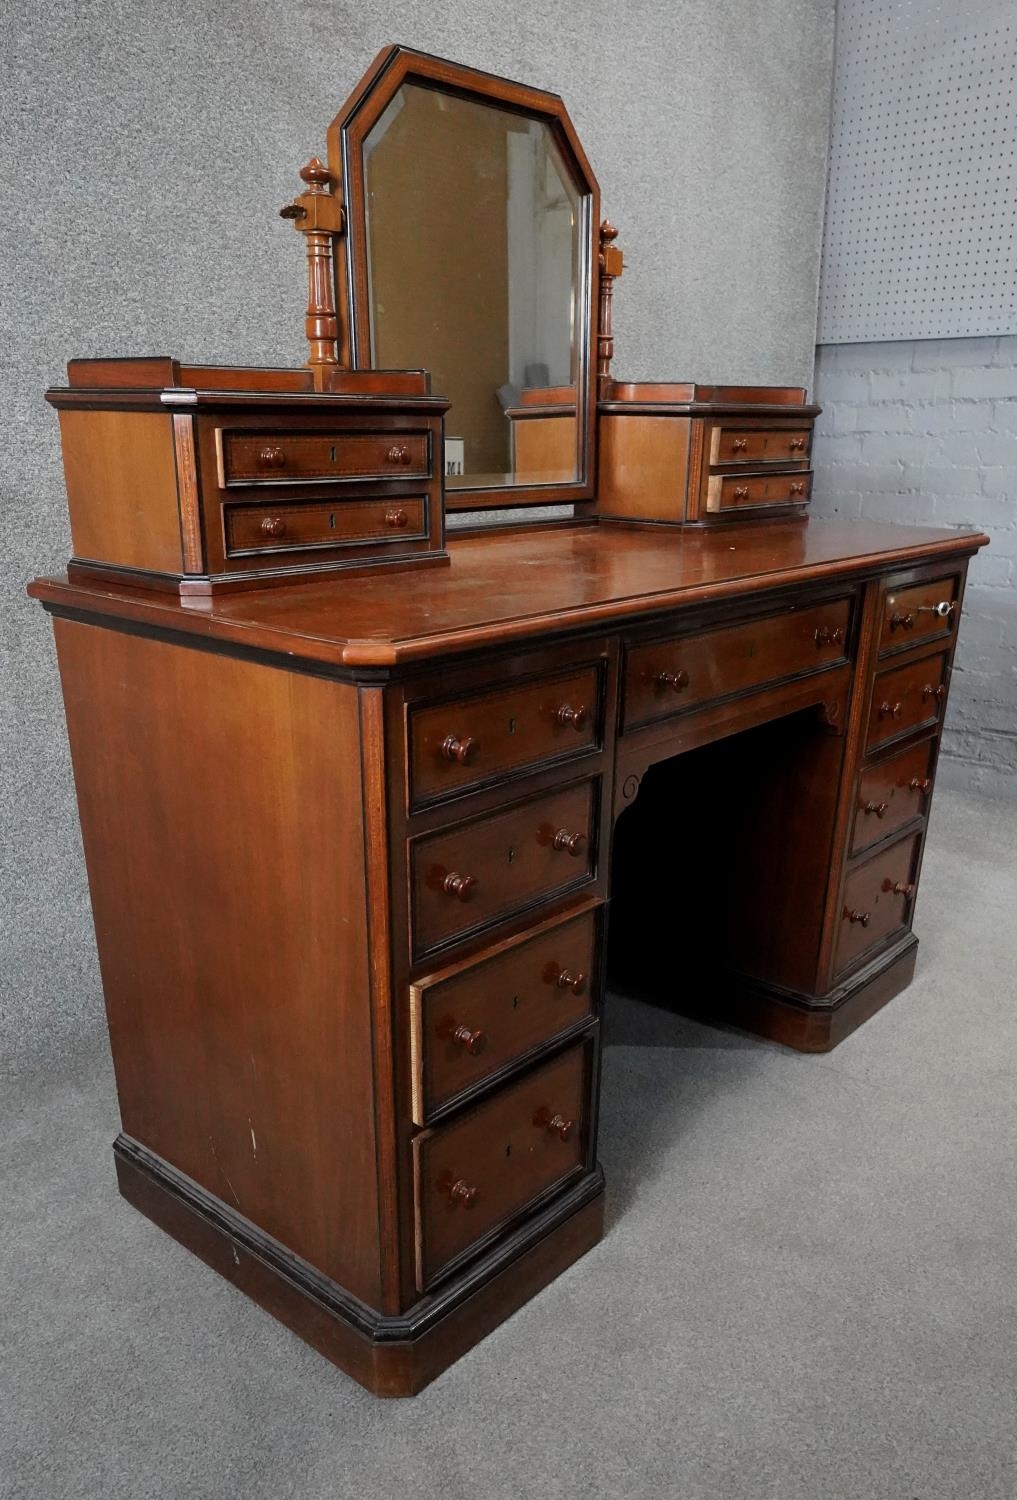 A 19th century Continental walnut, ebonised and inlaid dressing table with bevelled swing mirror - Image 3 of 5